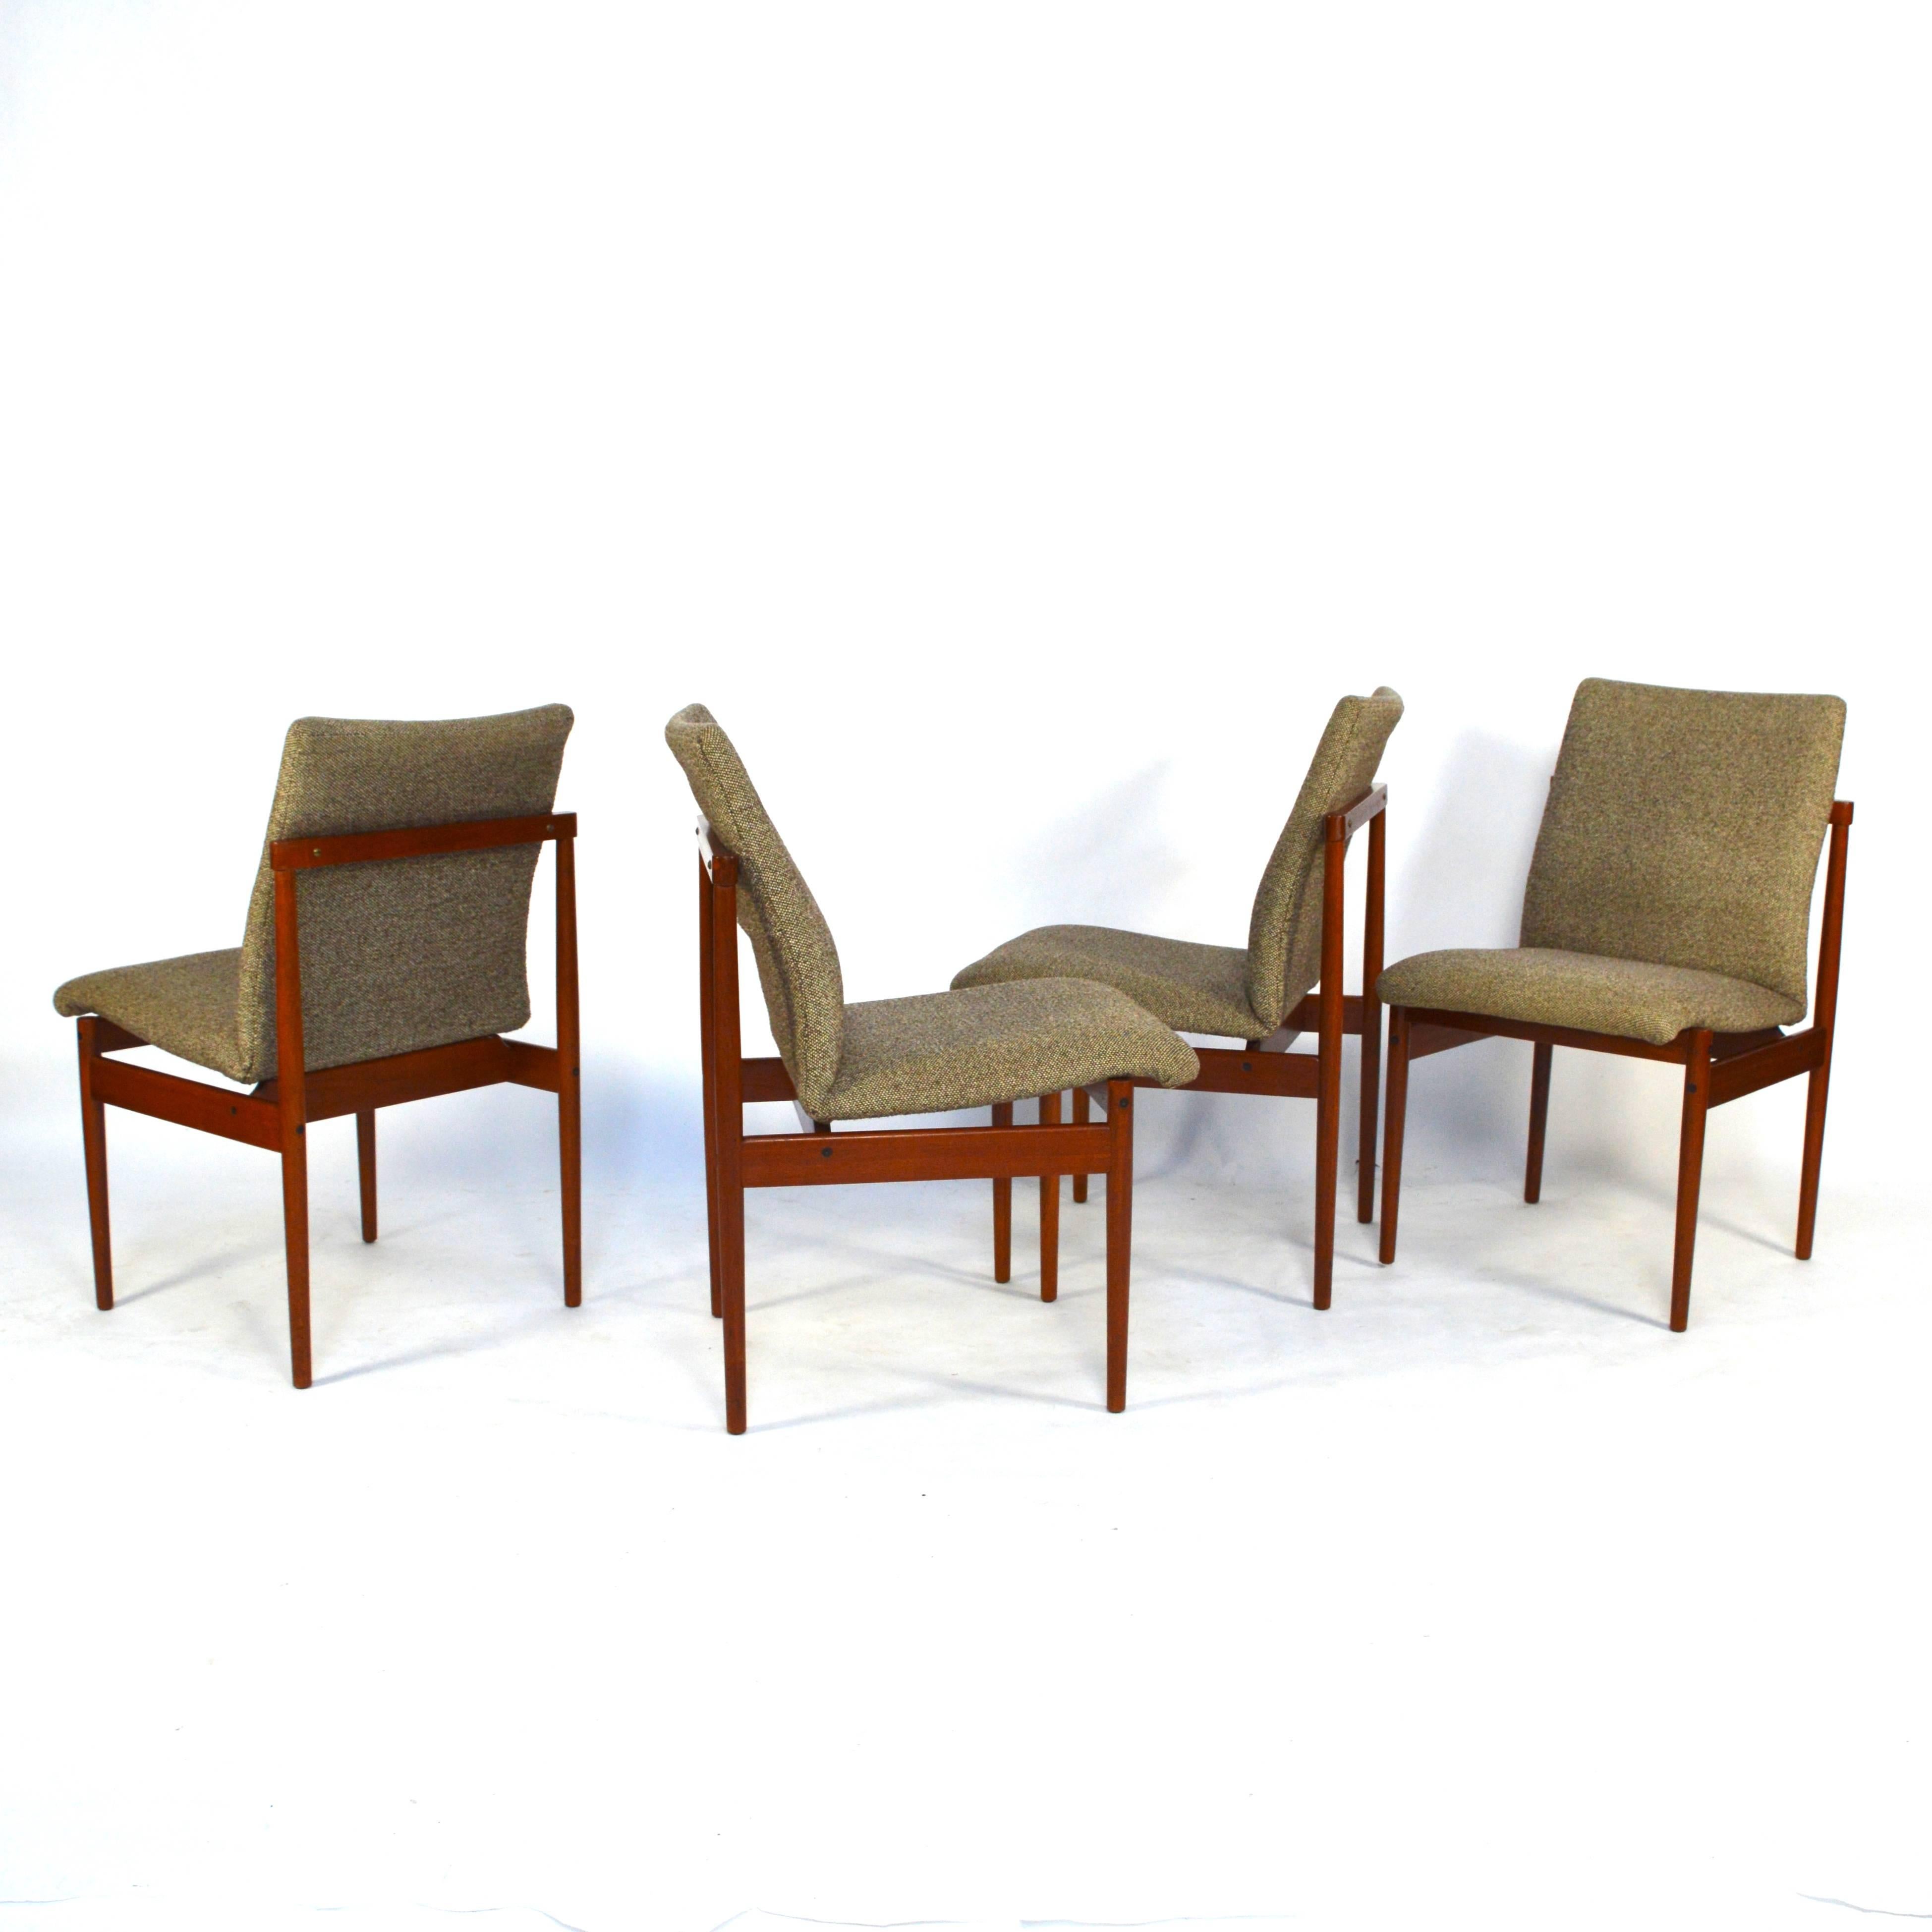 Designer: Unknown

Manufacturer: Thereca

Country: Netherlands

Model: Dining chairs

Design period: 1950-1959

Date of manufacturing: 1950-1960

Beautiful set of teak dining chairs. The chairs still have their original fabric which is